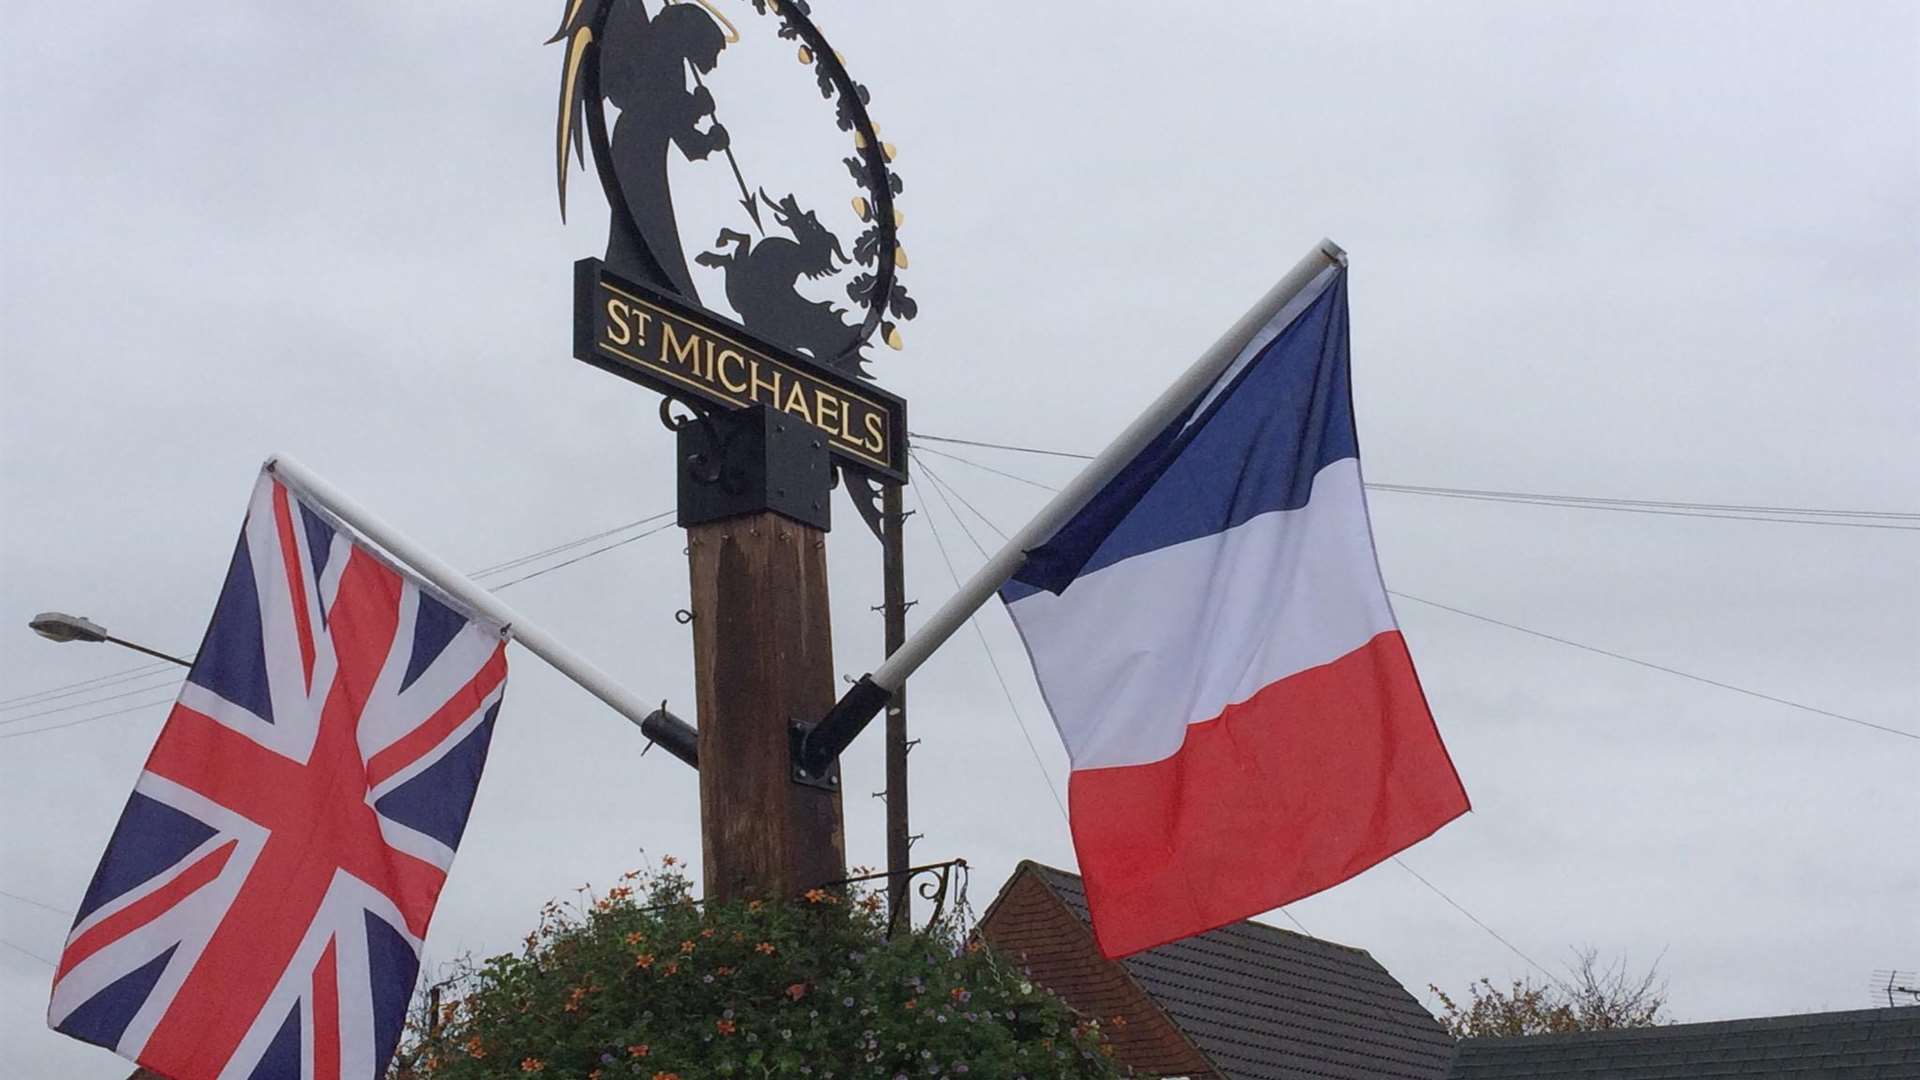 The French flag has been added to St Michael's village sign